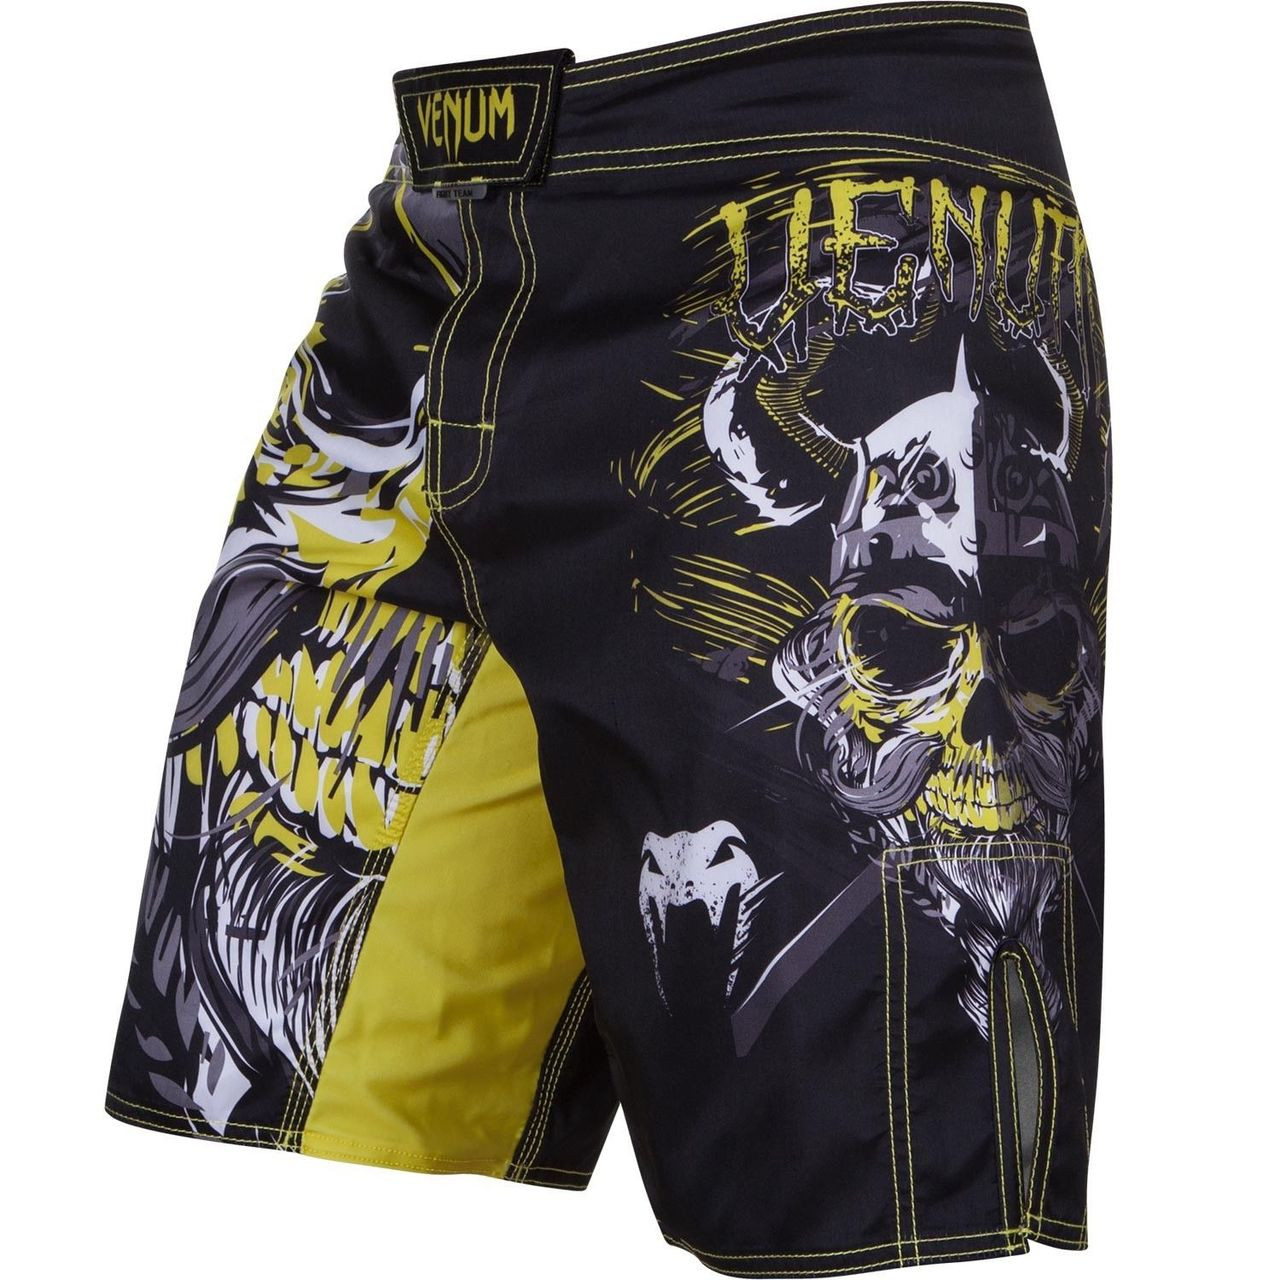 Venum Viking Fight Shorts now available at www.thejiujitsushop.com 

Enjoy Free Shiping from The Jiu Jitsu Shop today on all your Venum Fight Co Gear